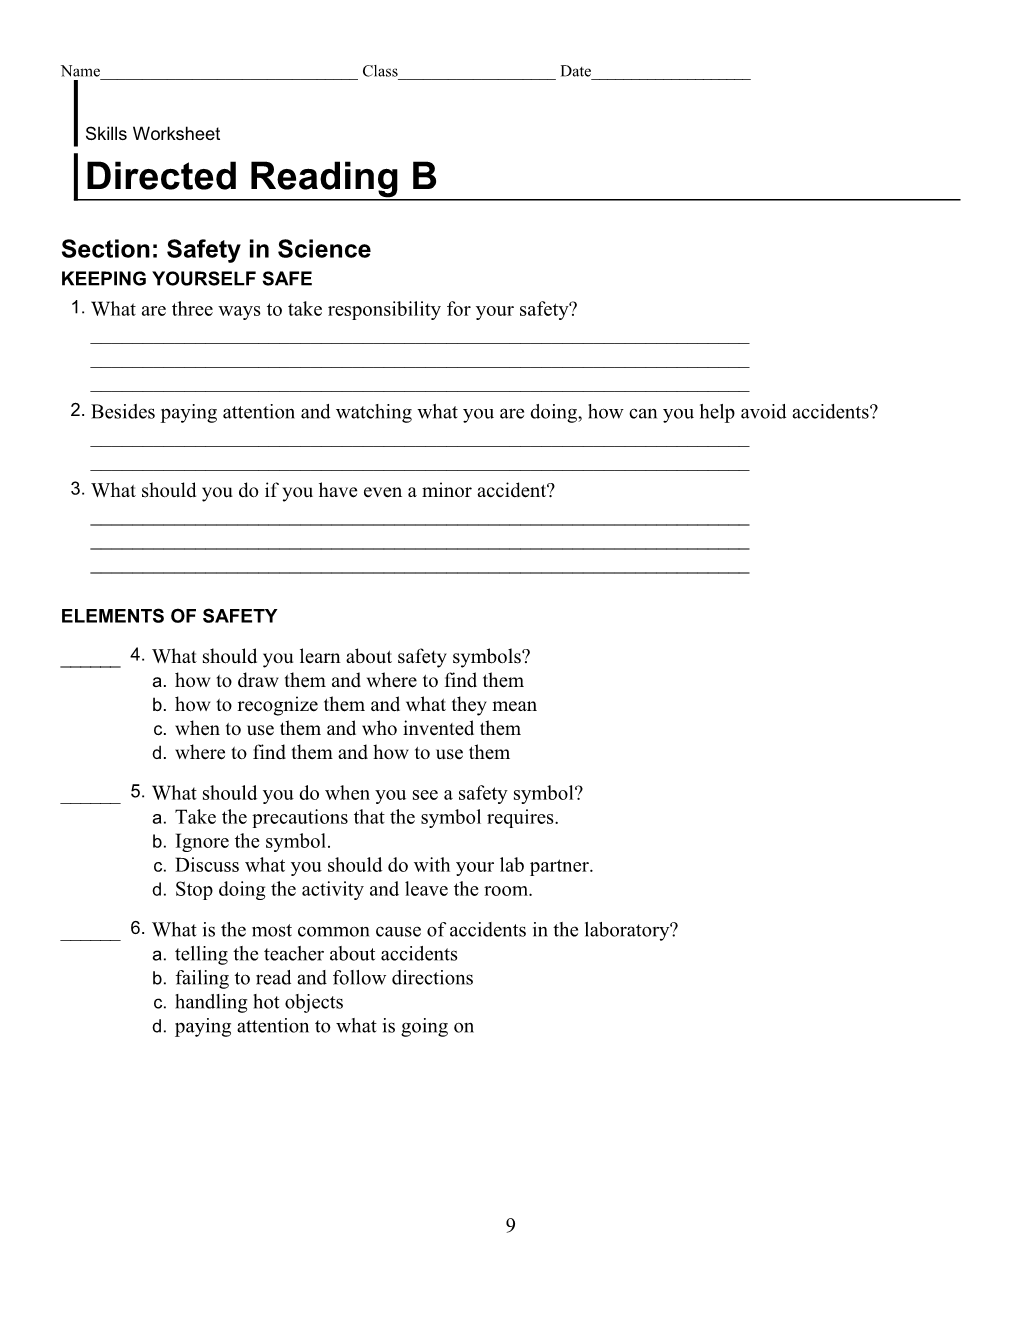 Directed Reading B